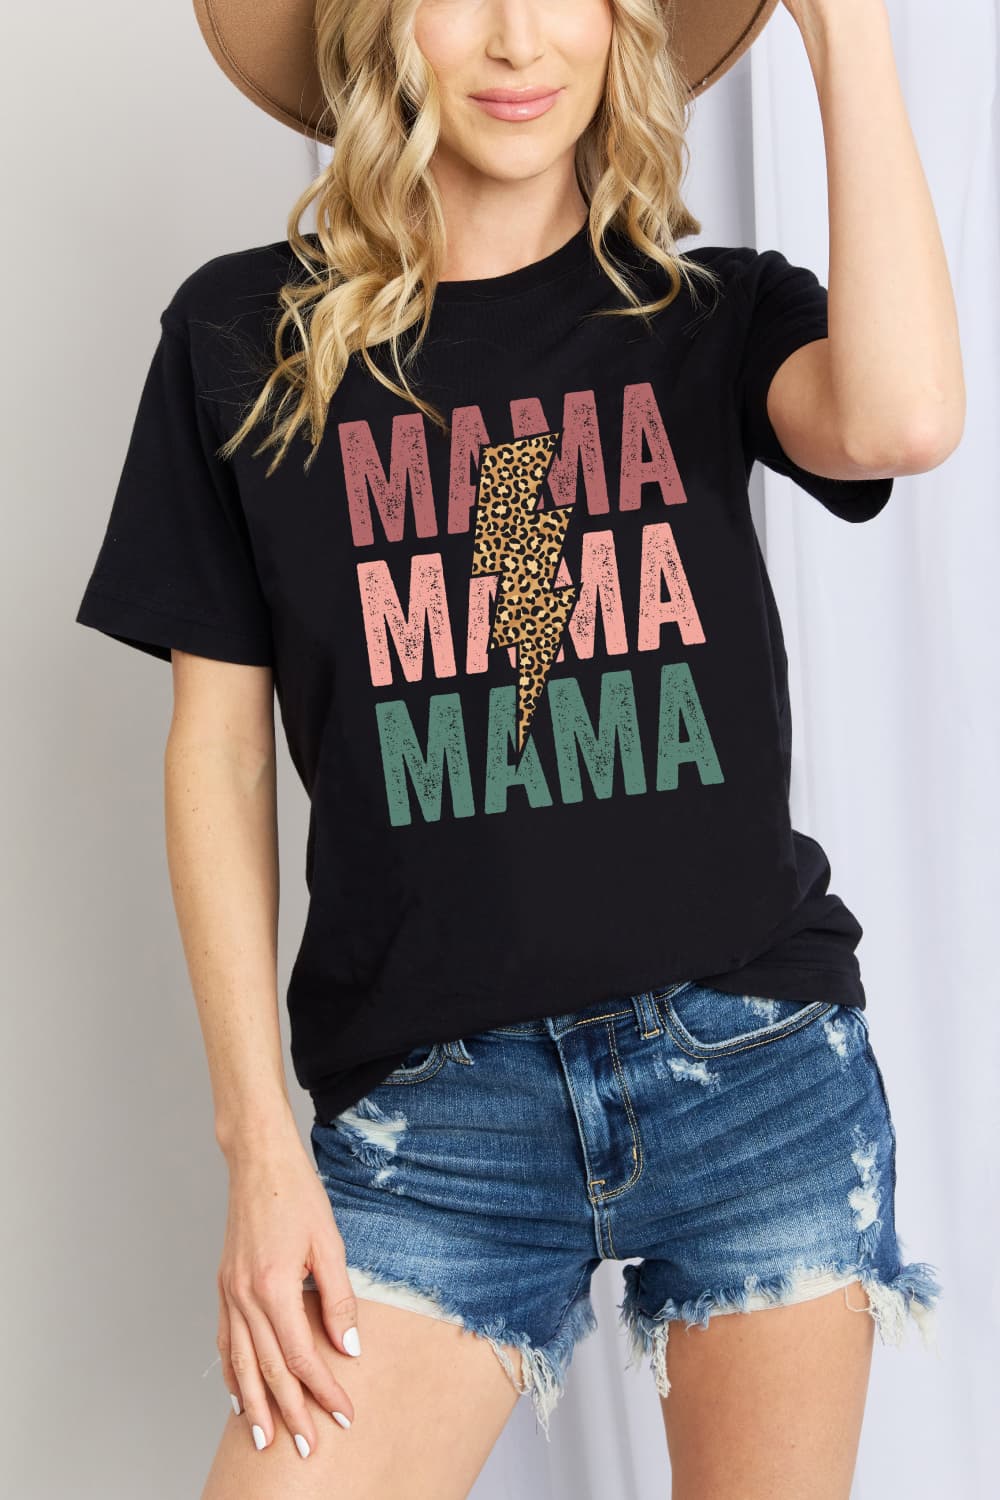 Leopard MAMA Colorful Graphic 100% Cotton Short-sleeve Tee Shirt